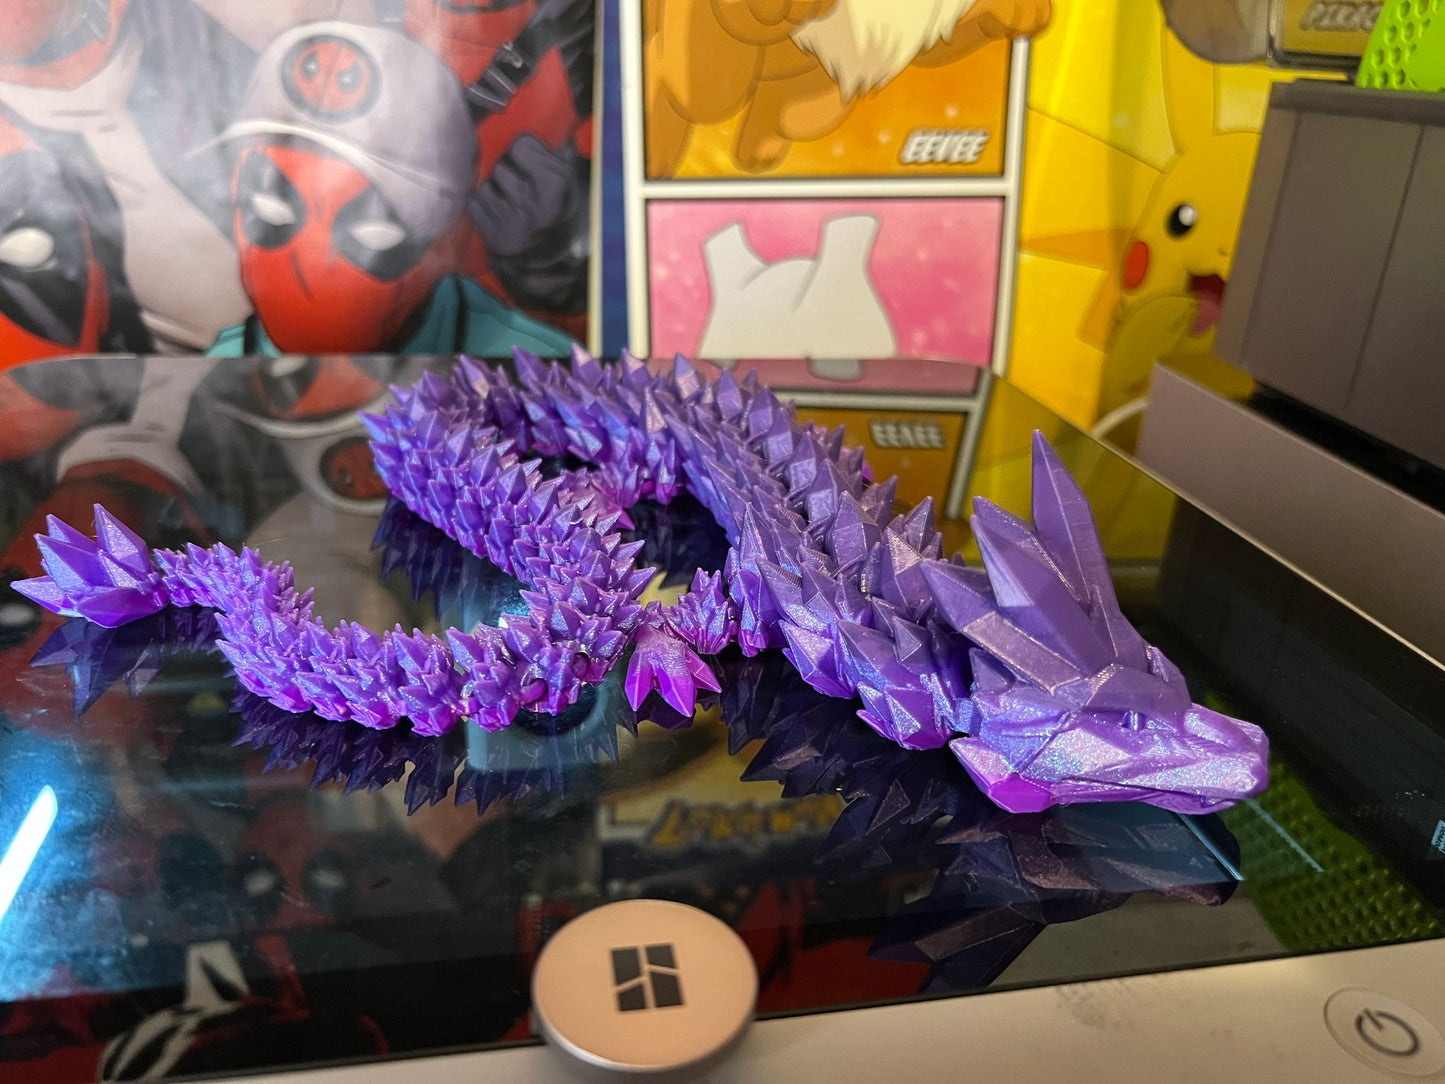 Limited Color Large Crystal Dragons!